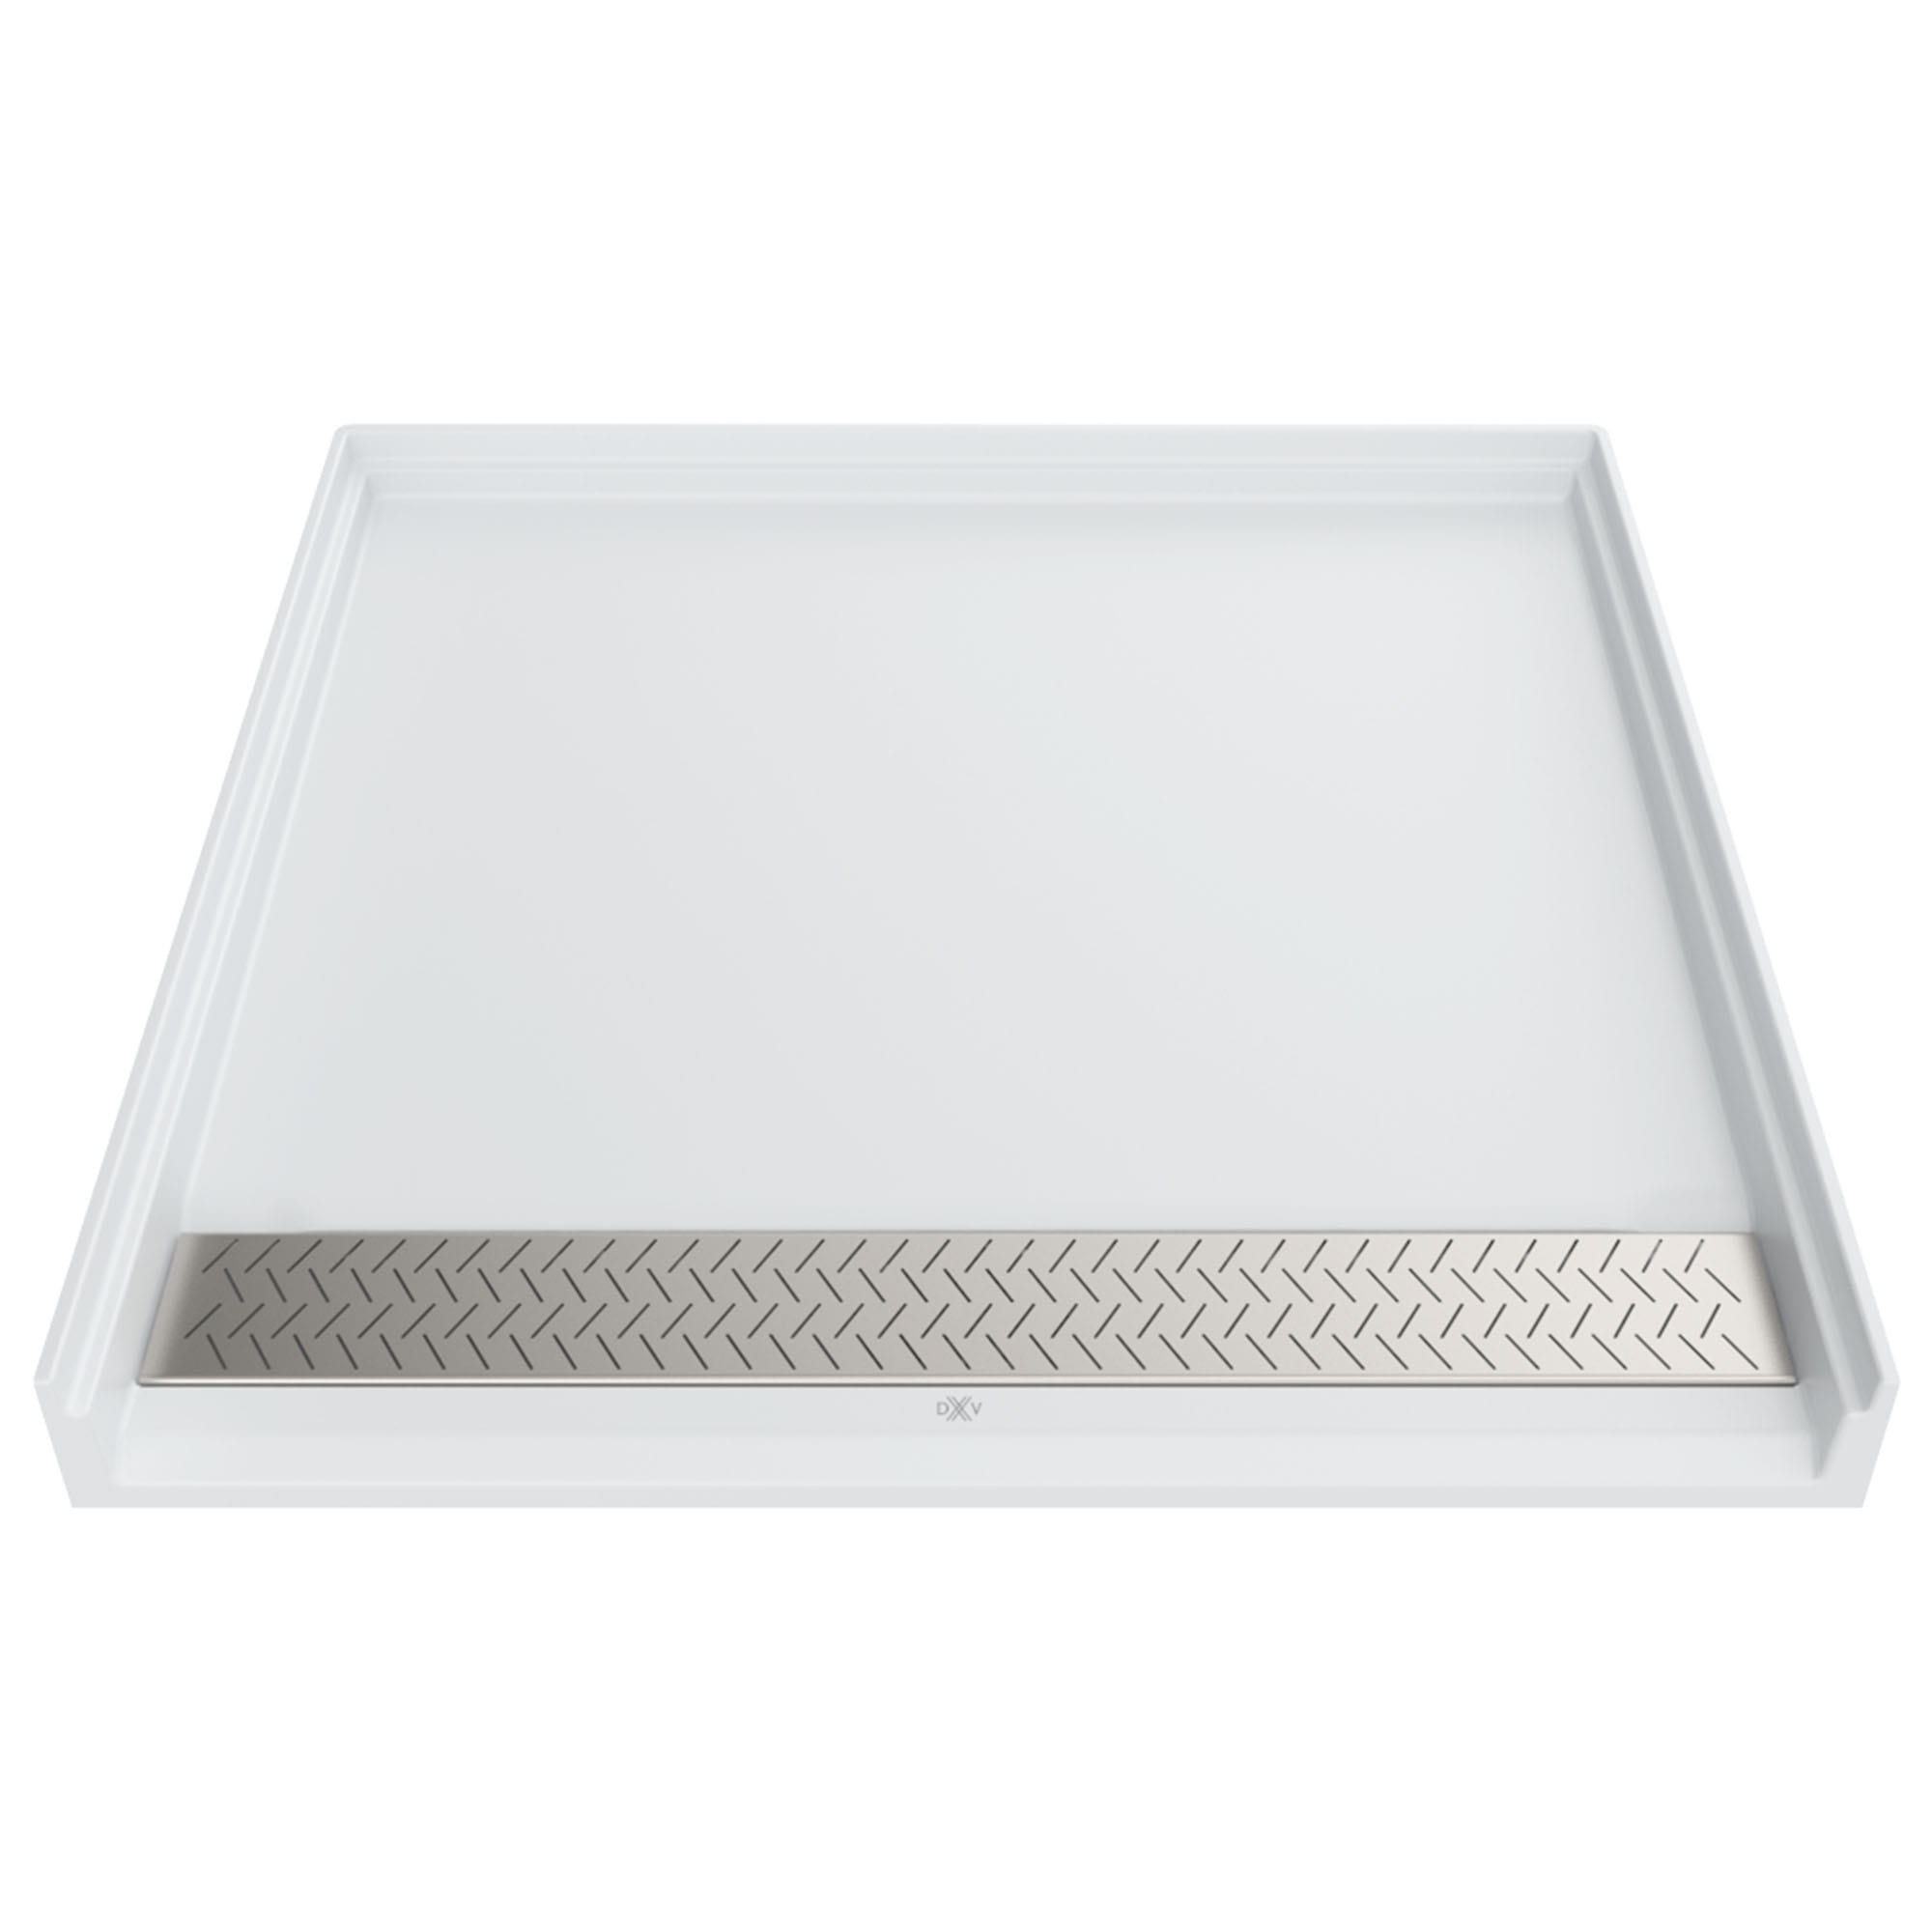 DXV MODULUS 38” X 38” SOLID SURFACE SHOWER BASE